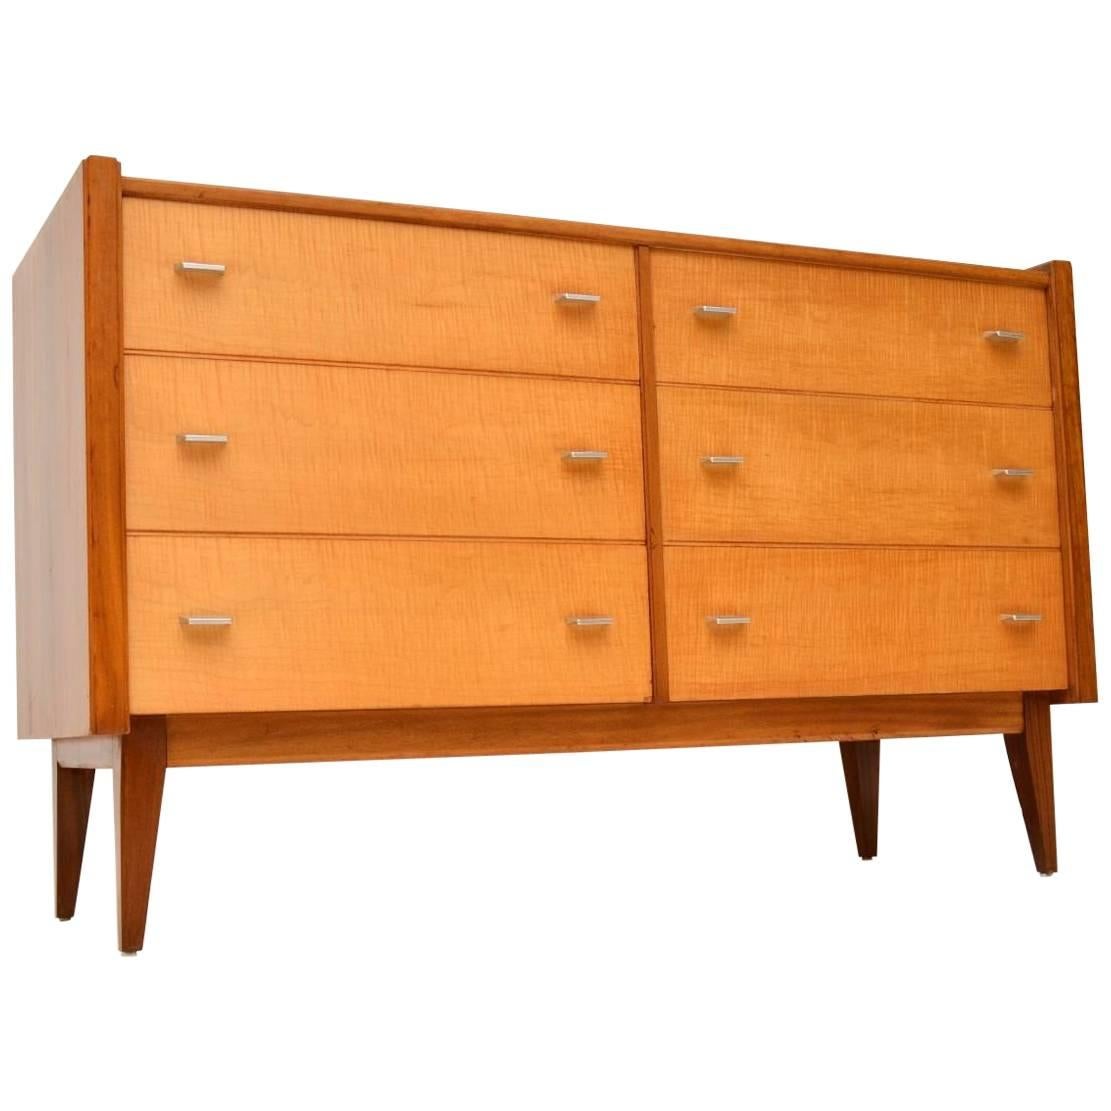 1950s Vintage Sideboard by Alfred COX in Walnut and Sycamore